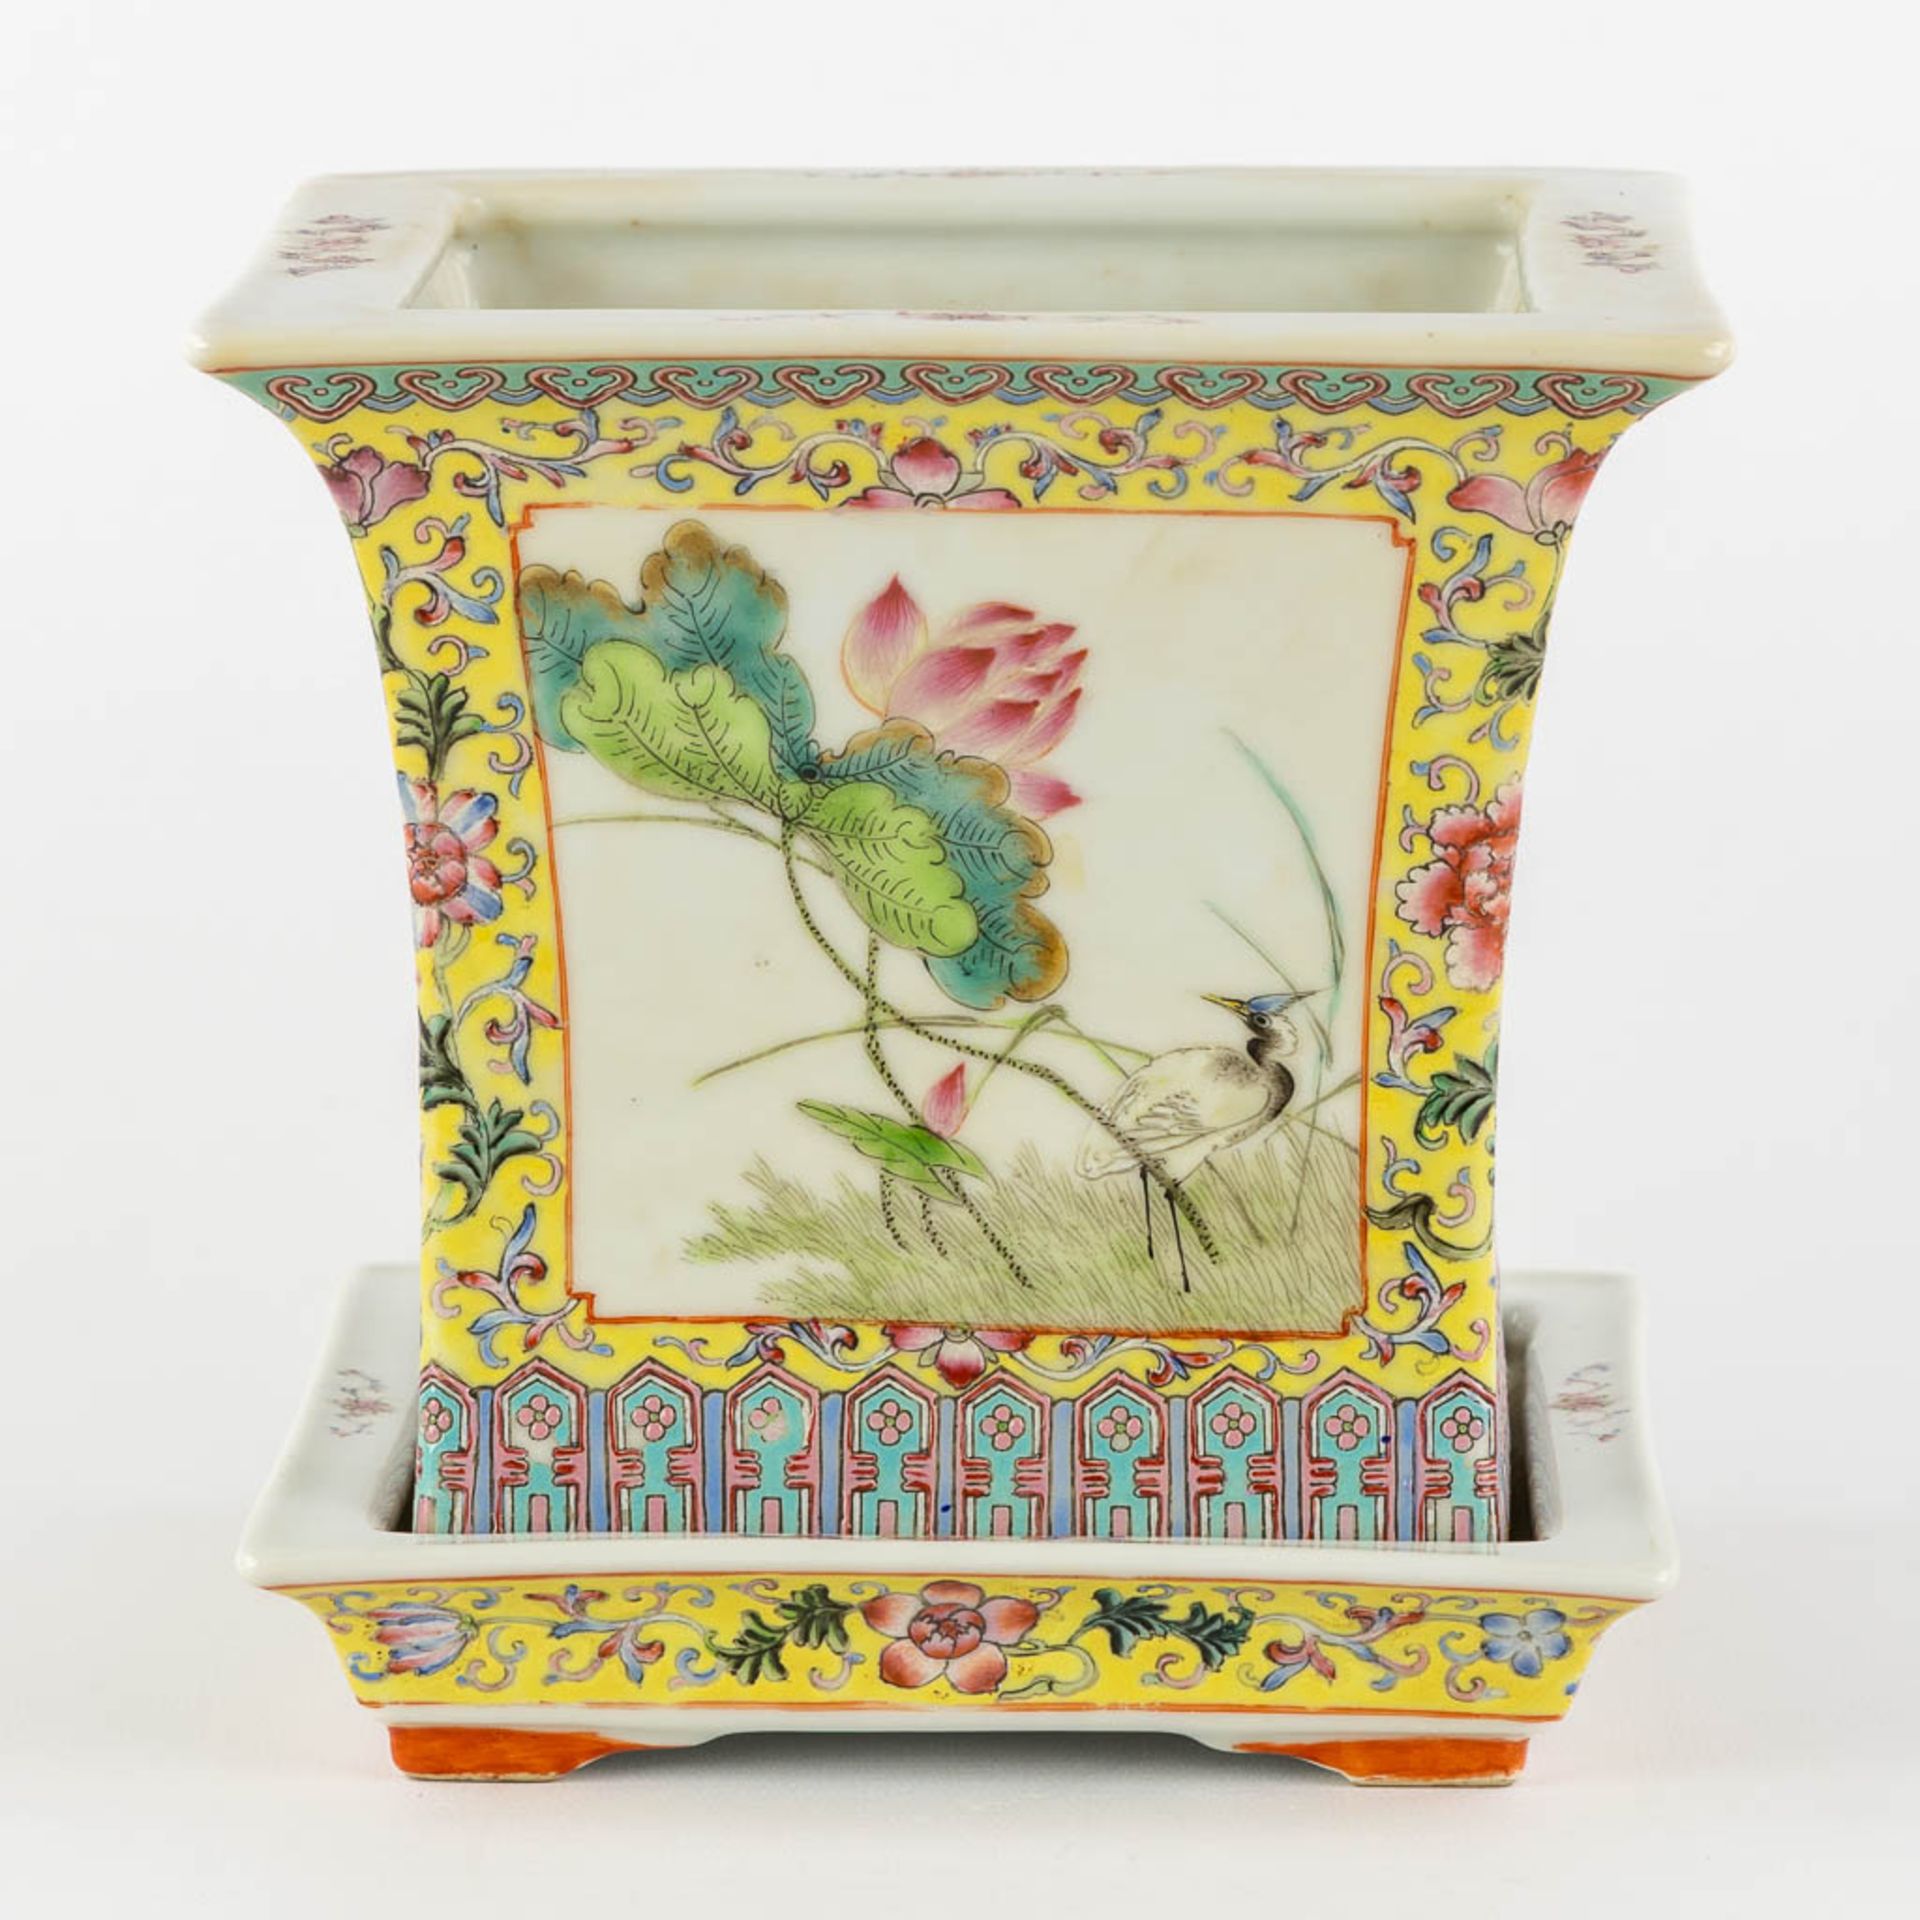 A Chinese Cache Pot, Famille Rose decorated with fauna and flora. (L:18 x W:18 x H:17,5 cm) - Image 6 of 13